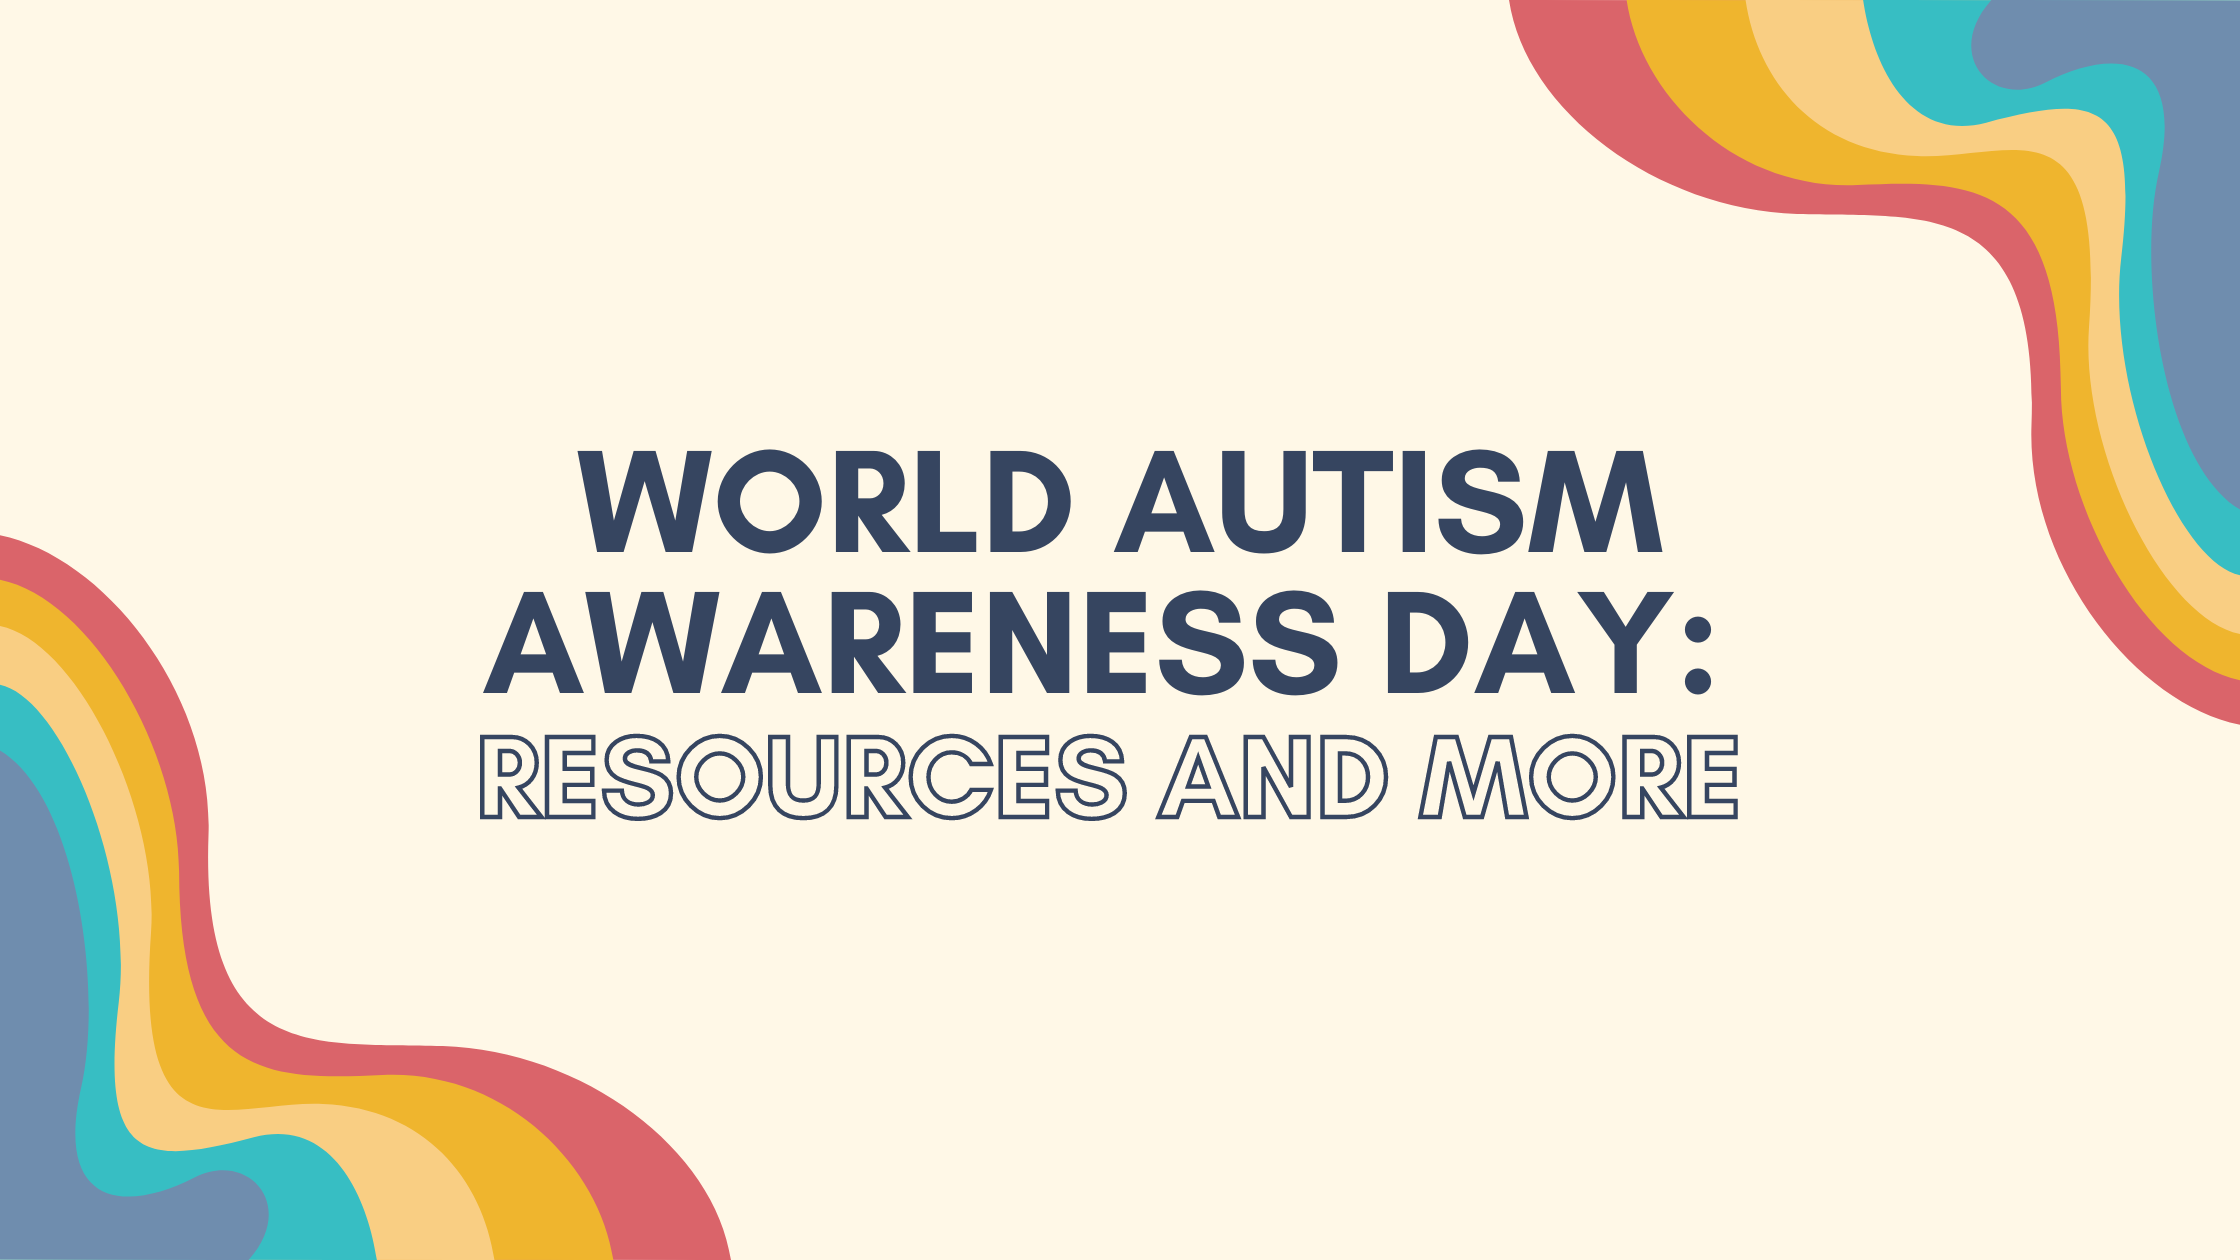 Light yellow background with dark blue text on top 'World Autism Awareness Day: Resources and More' and rainbow designs in corners of graphic.